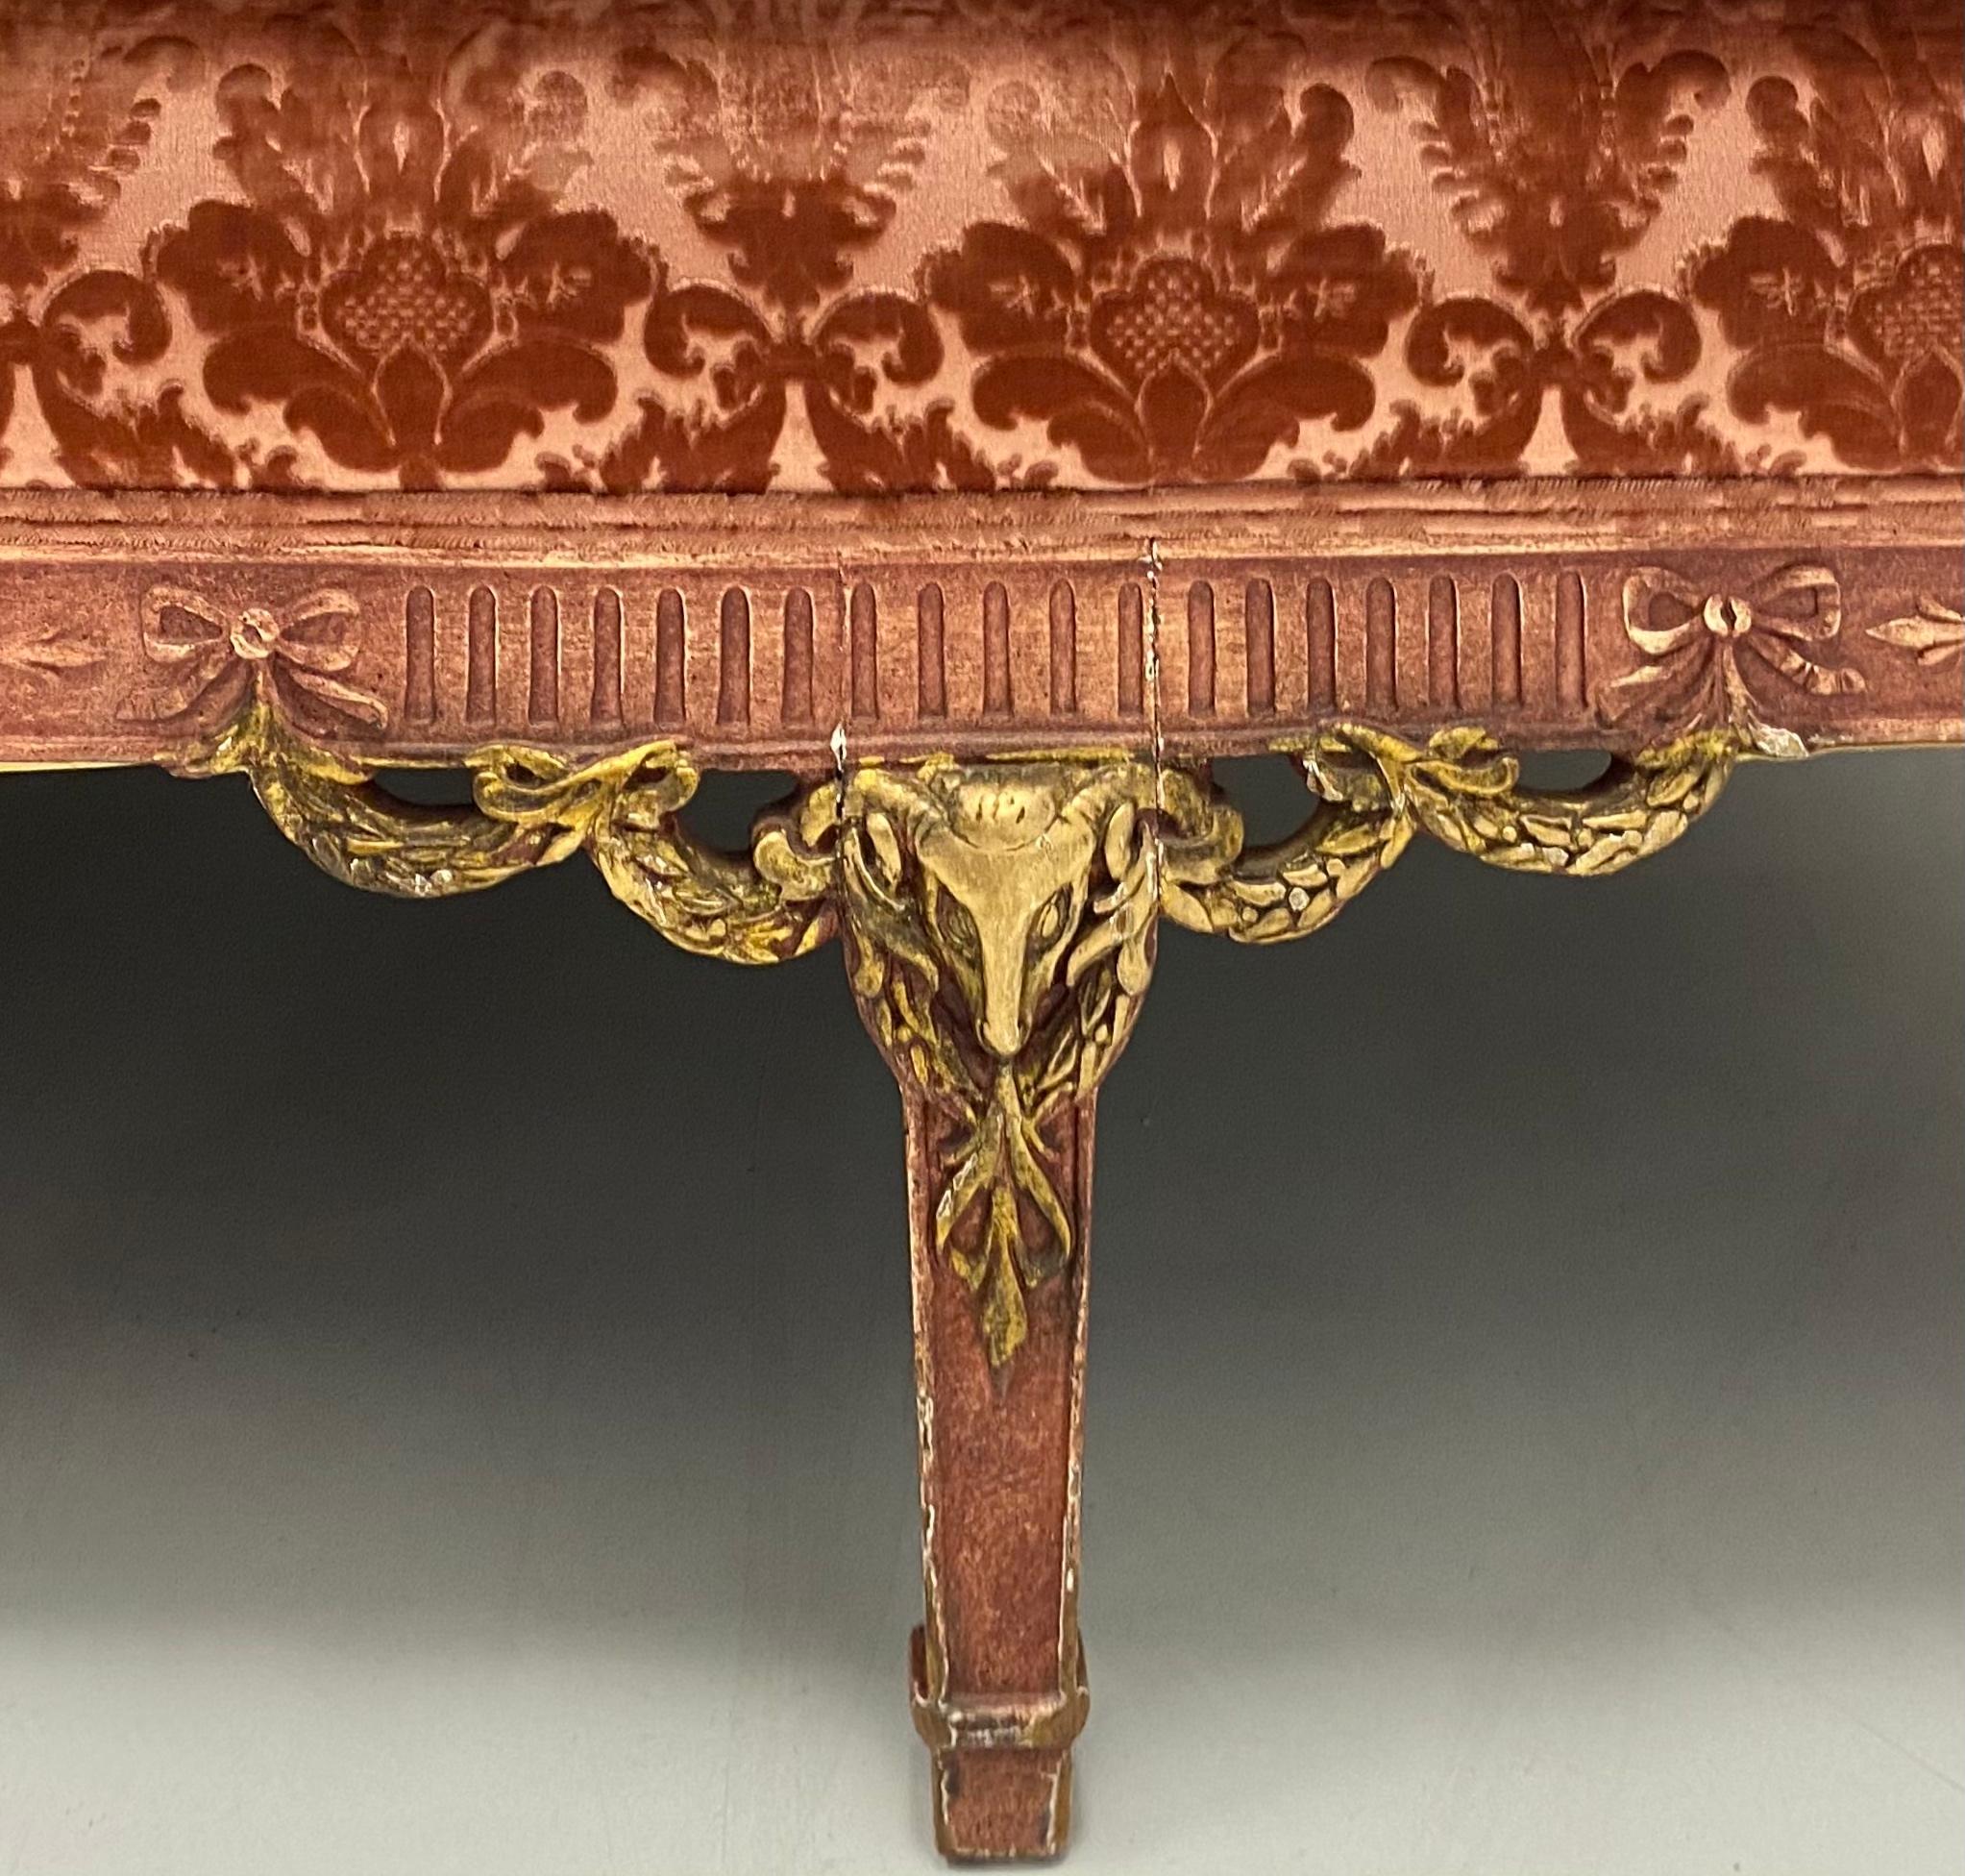 This is an early French neoclassical style pink velvet sofa or canapé . This is an amazing piece. Yes, it does show wear, but it is completely original. The pink painted frame is accentuated with gilt rams, and the cut pink velvet does not have any